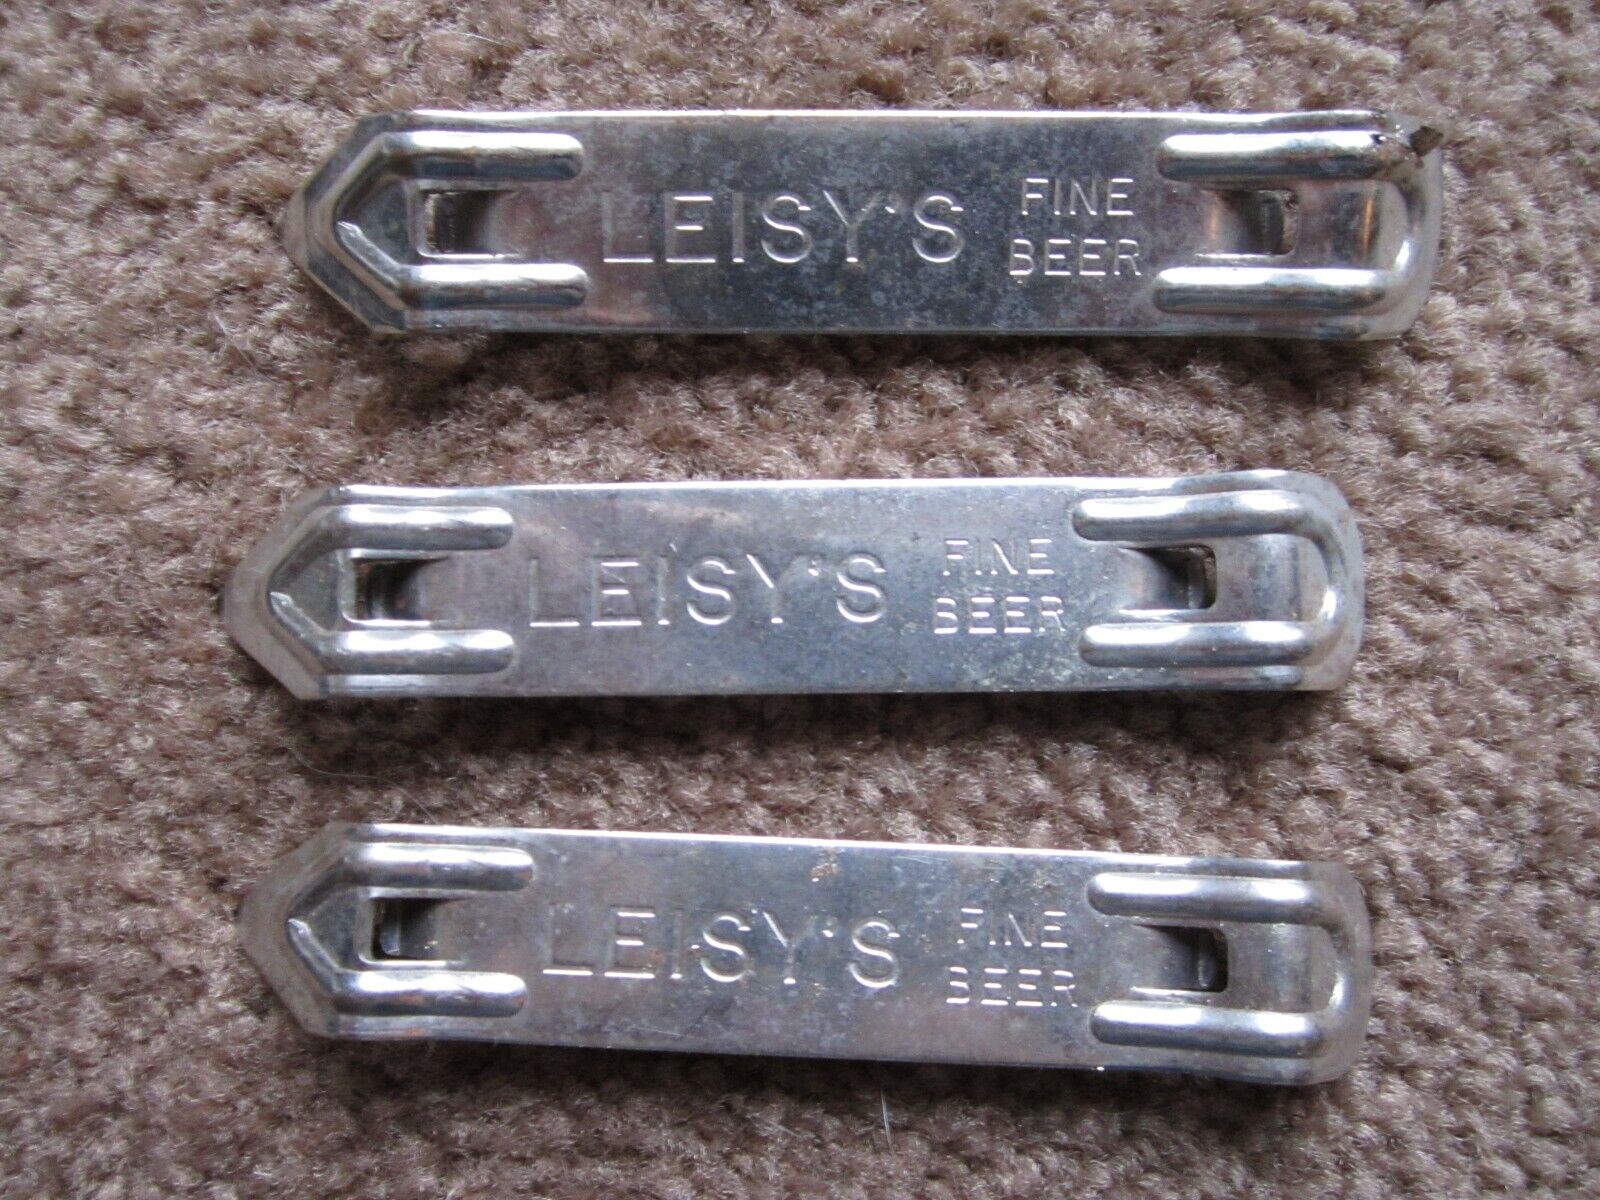 VINTAGE Lot of 3 LEISY\'S beer bottle openers Cleveland, OH